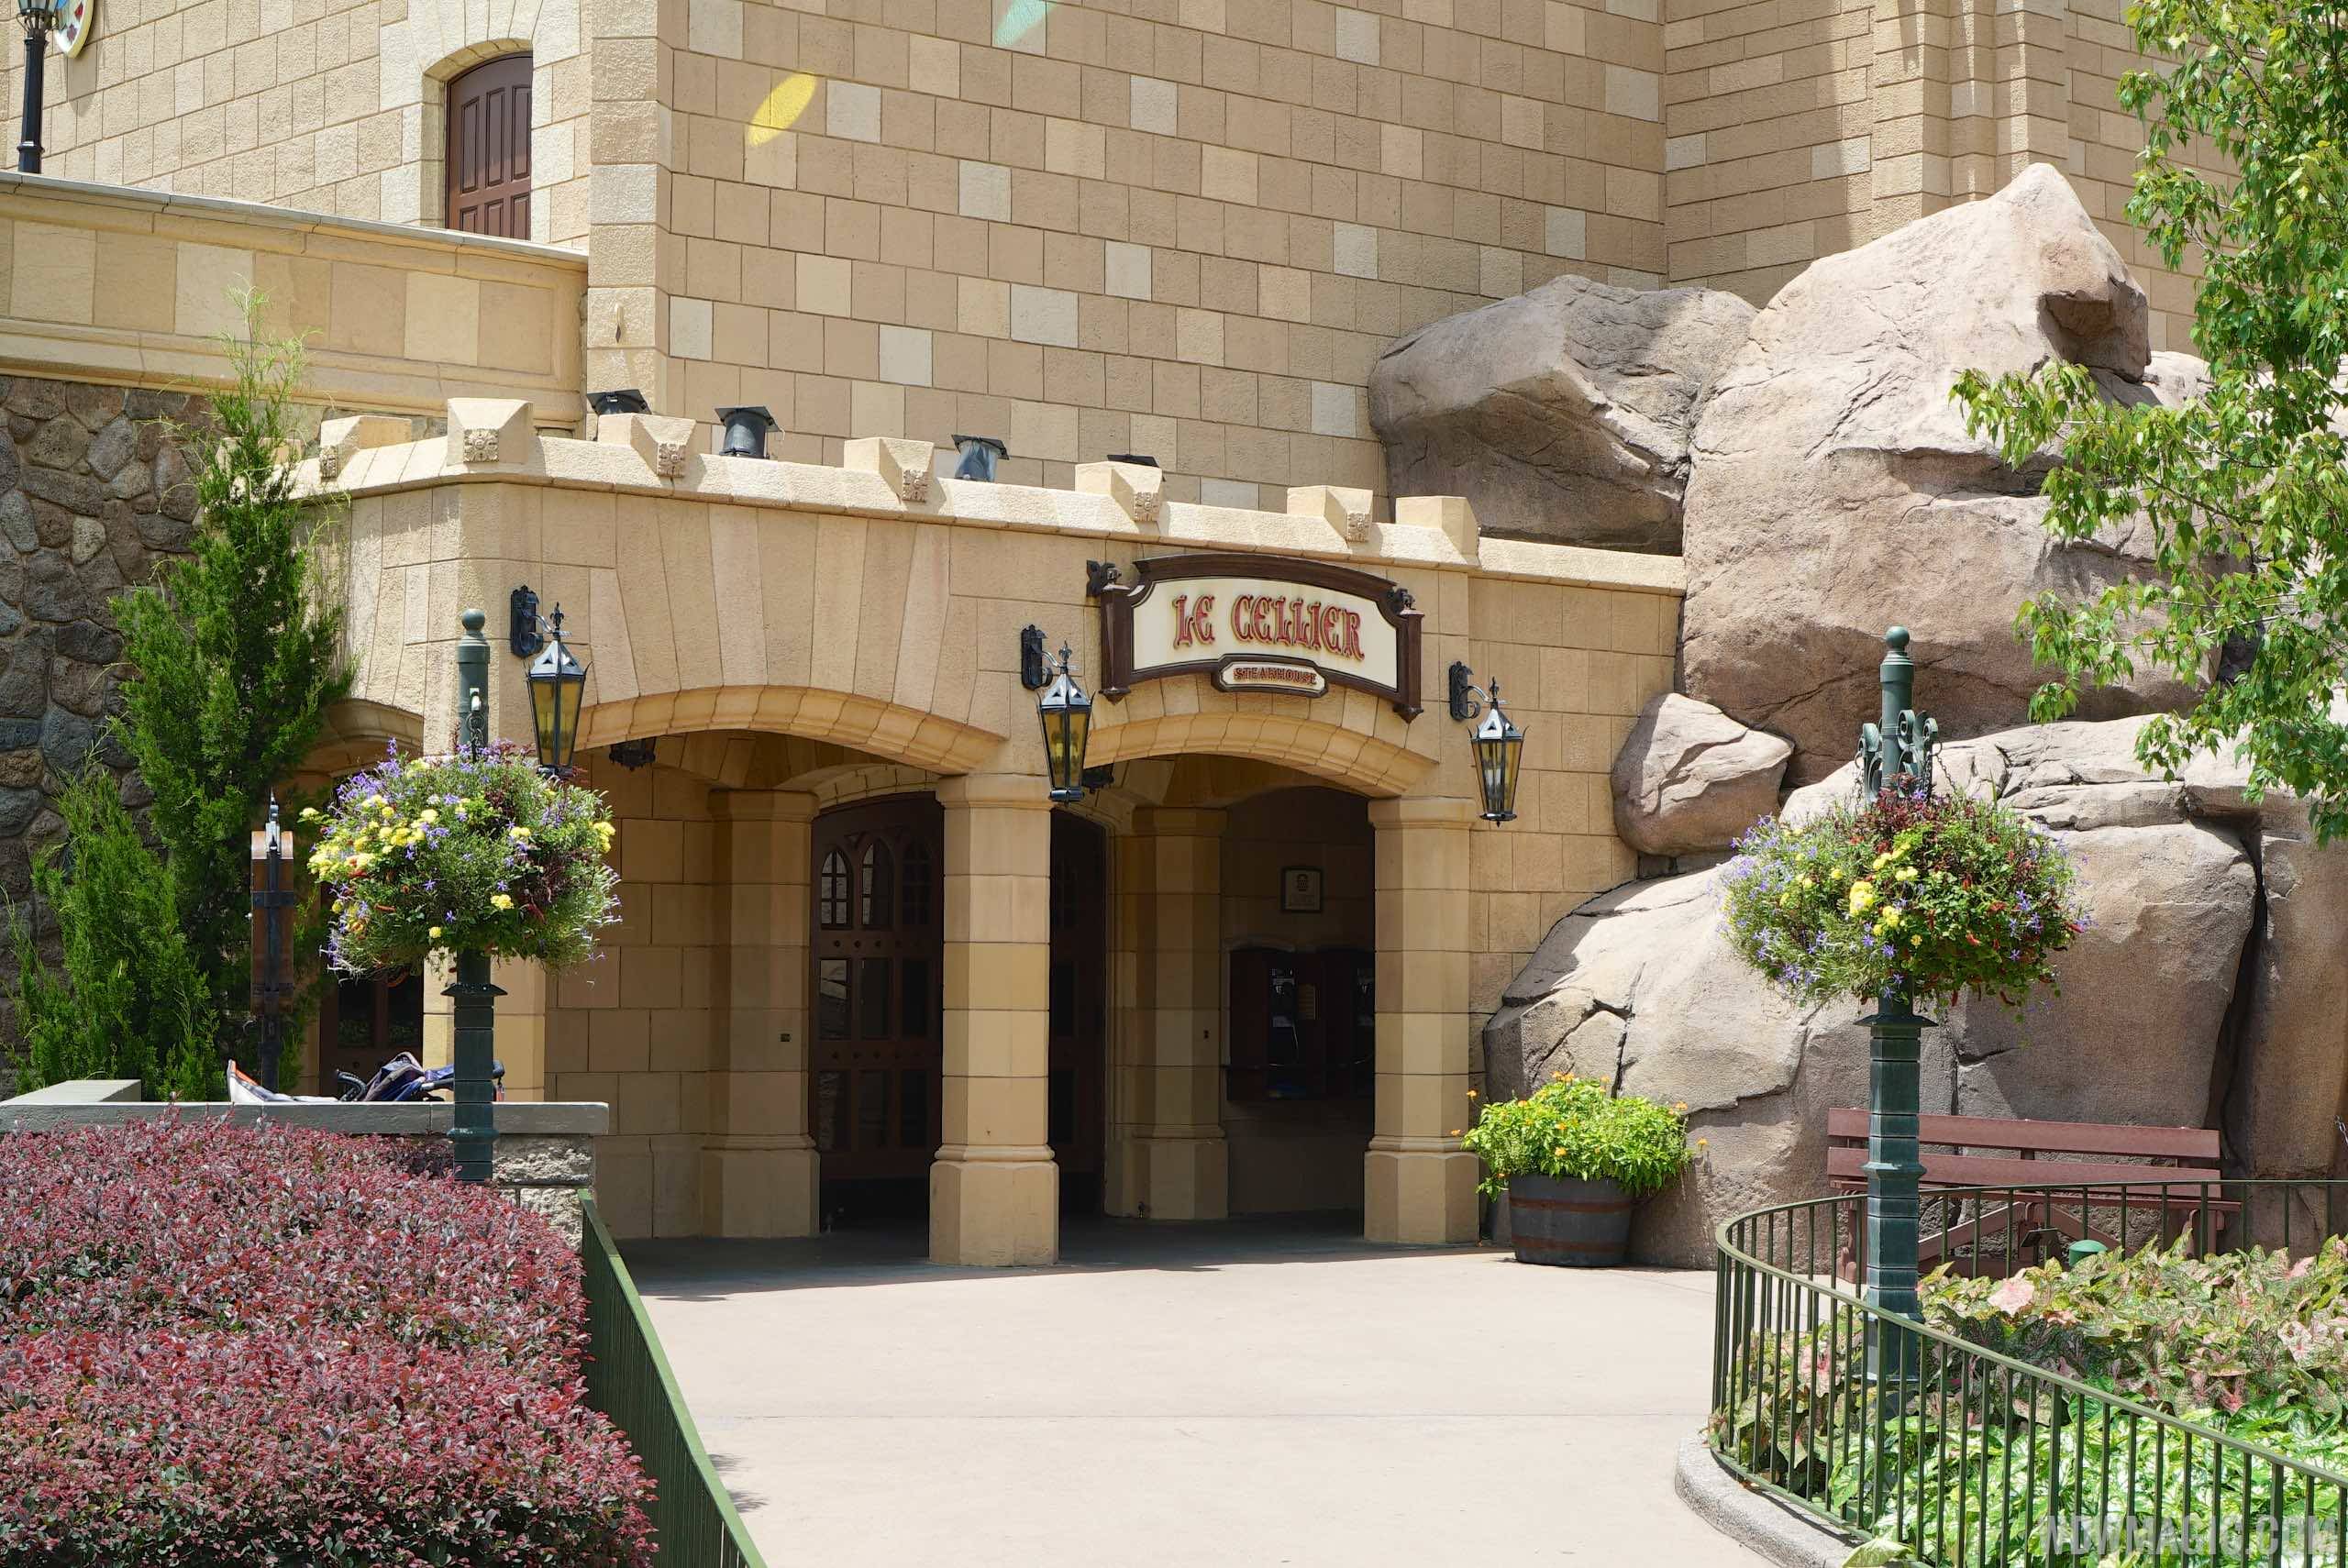 Le Cellier Steakhouse offering brunch during the Epcot International Festival of the Arts